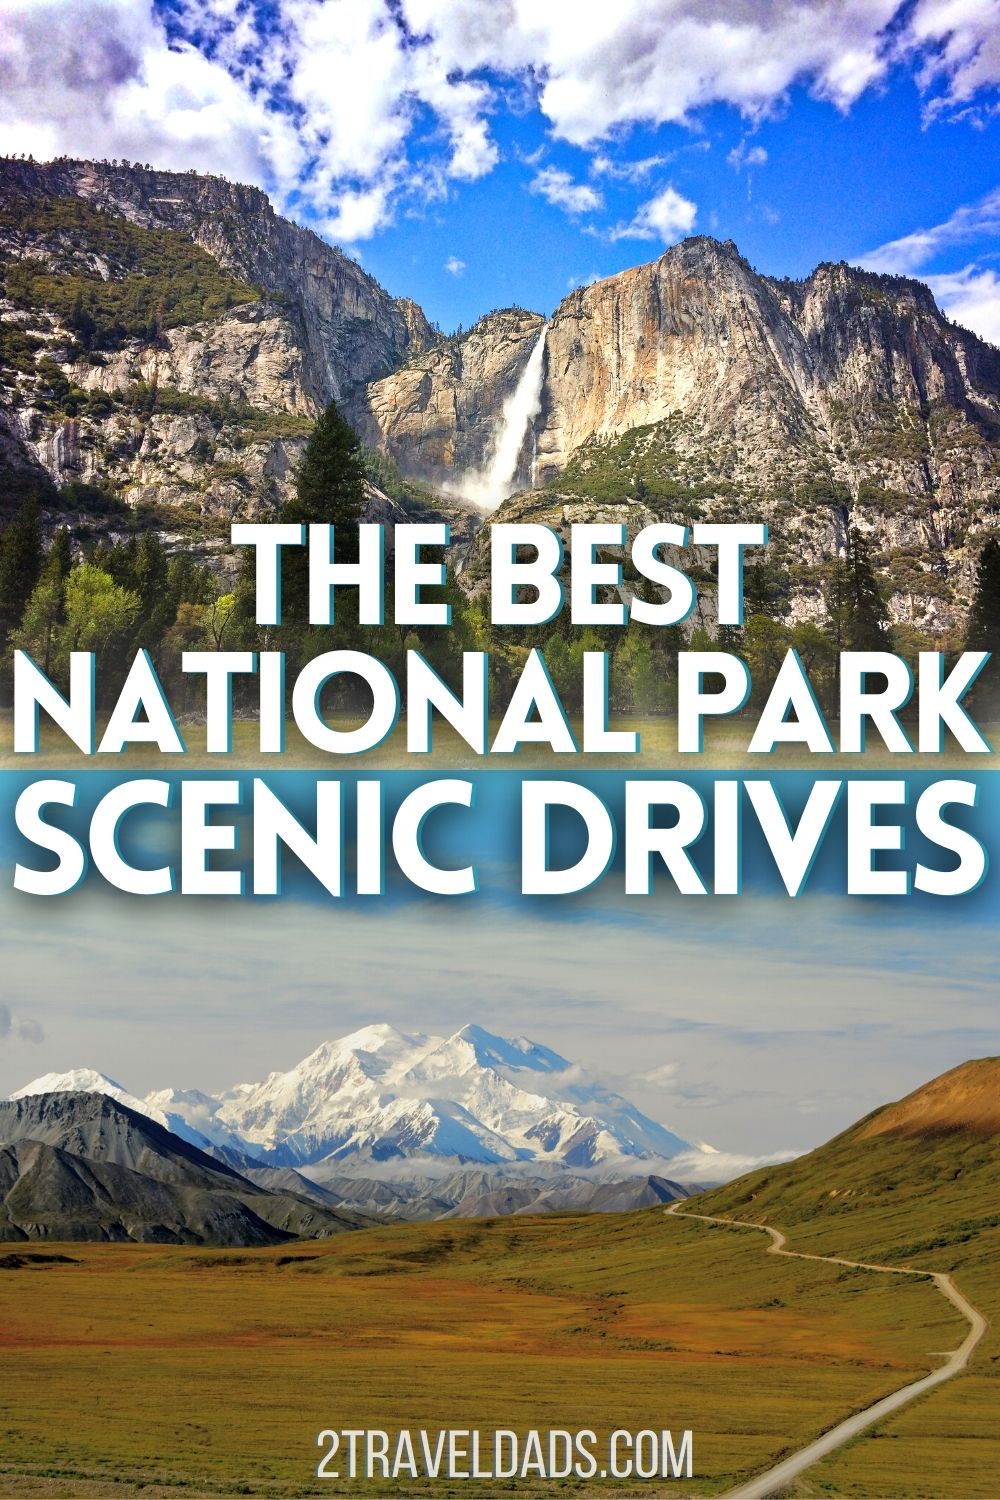 National Park scenic drives are the best way to see the epic landscapes and wildlife across the USA. From desert landscapes to road lotteries, these epic drives are perfect to include in your road trip planning.